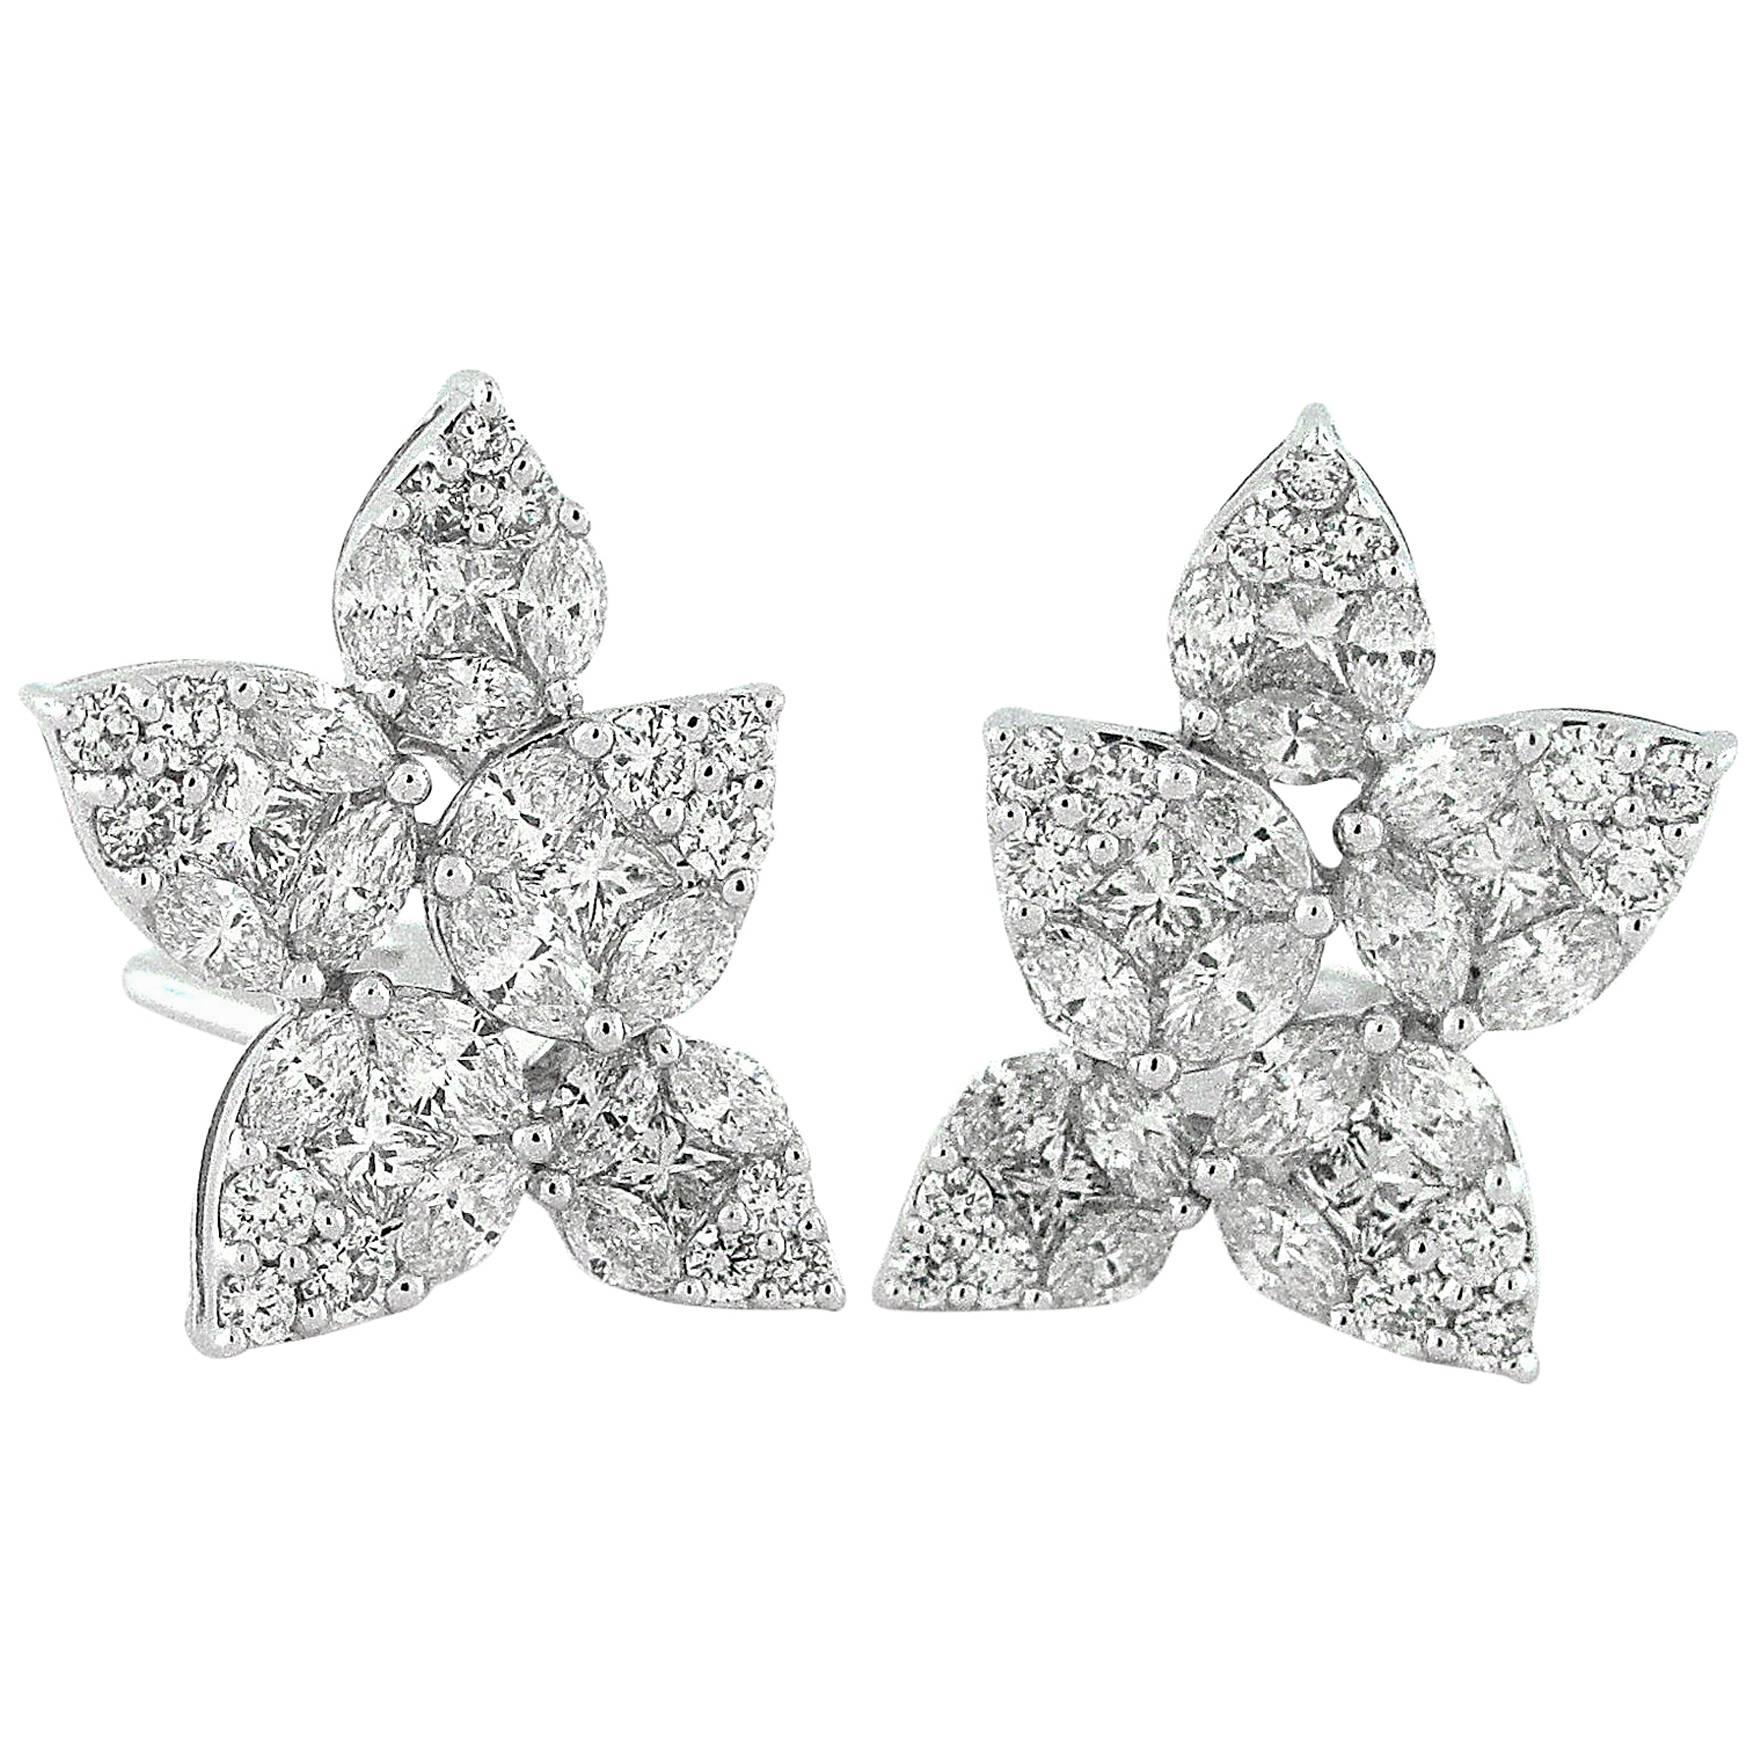 Illusion Harry Winston Style Cluster Earrings